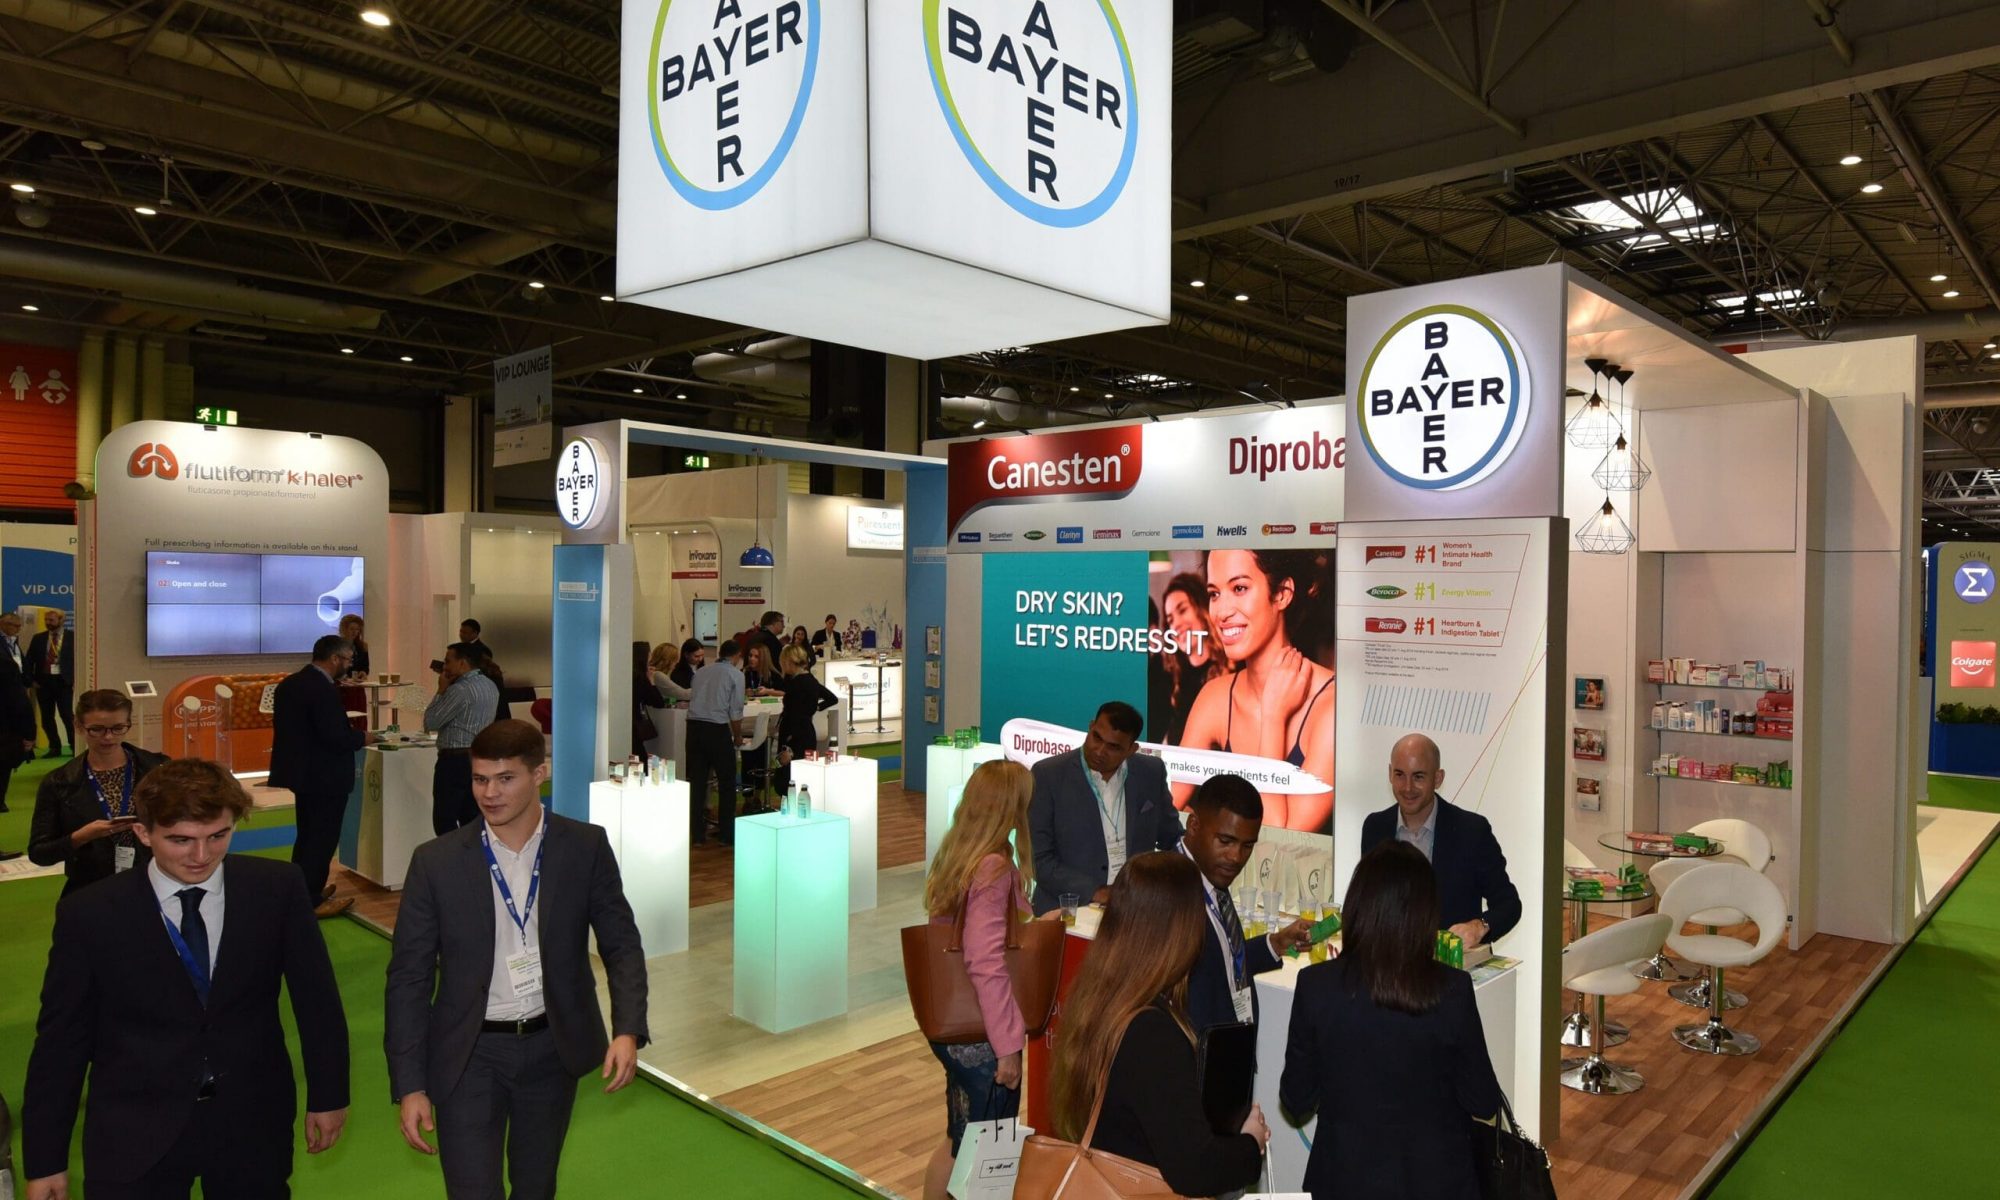 Bayer Exhibition Stand